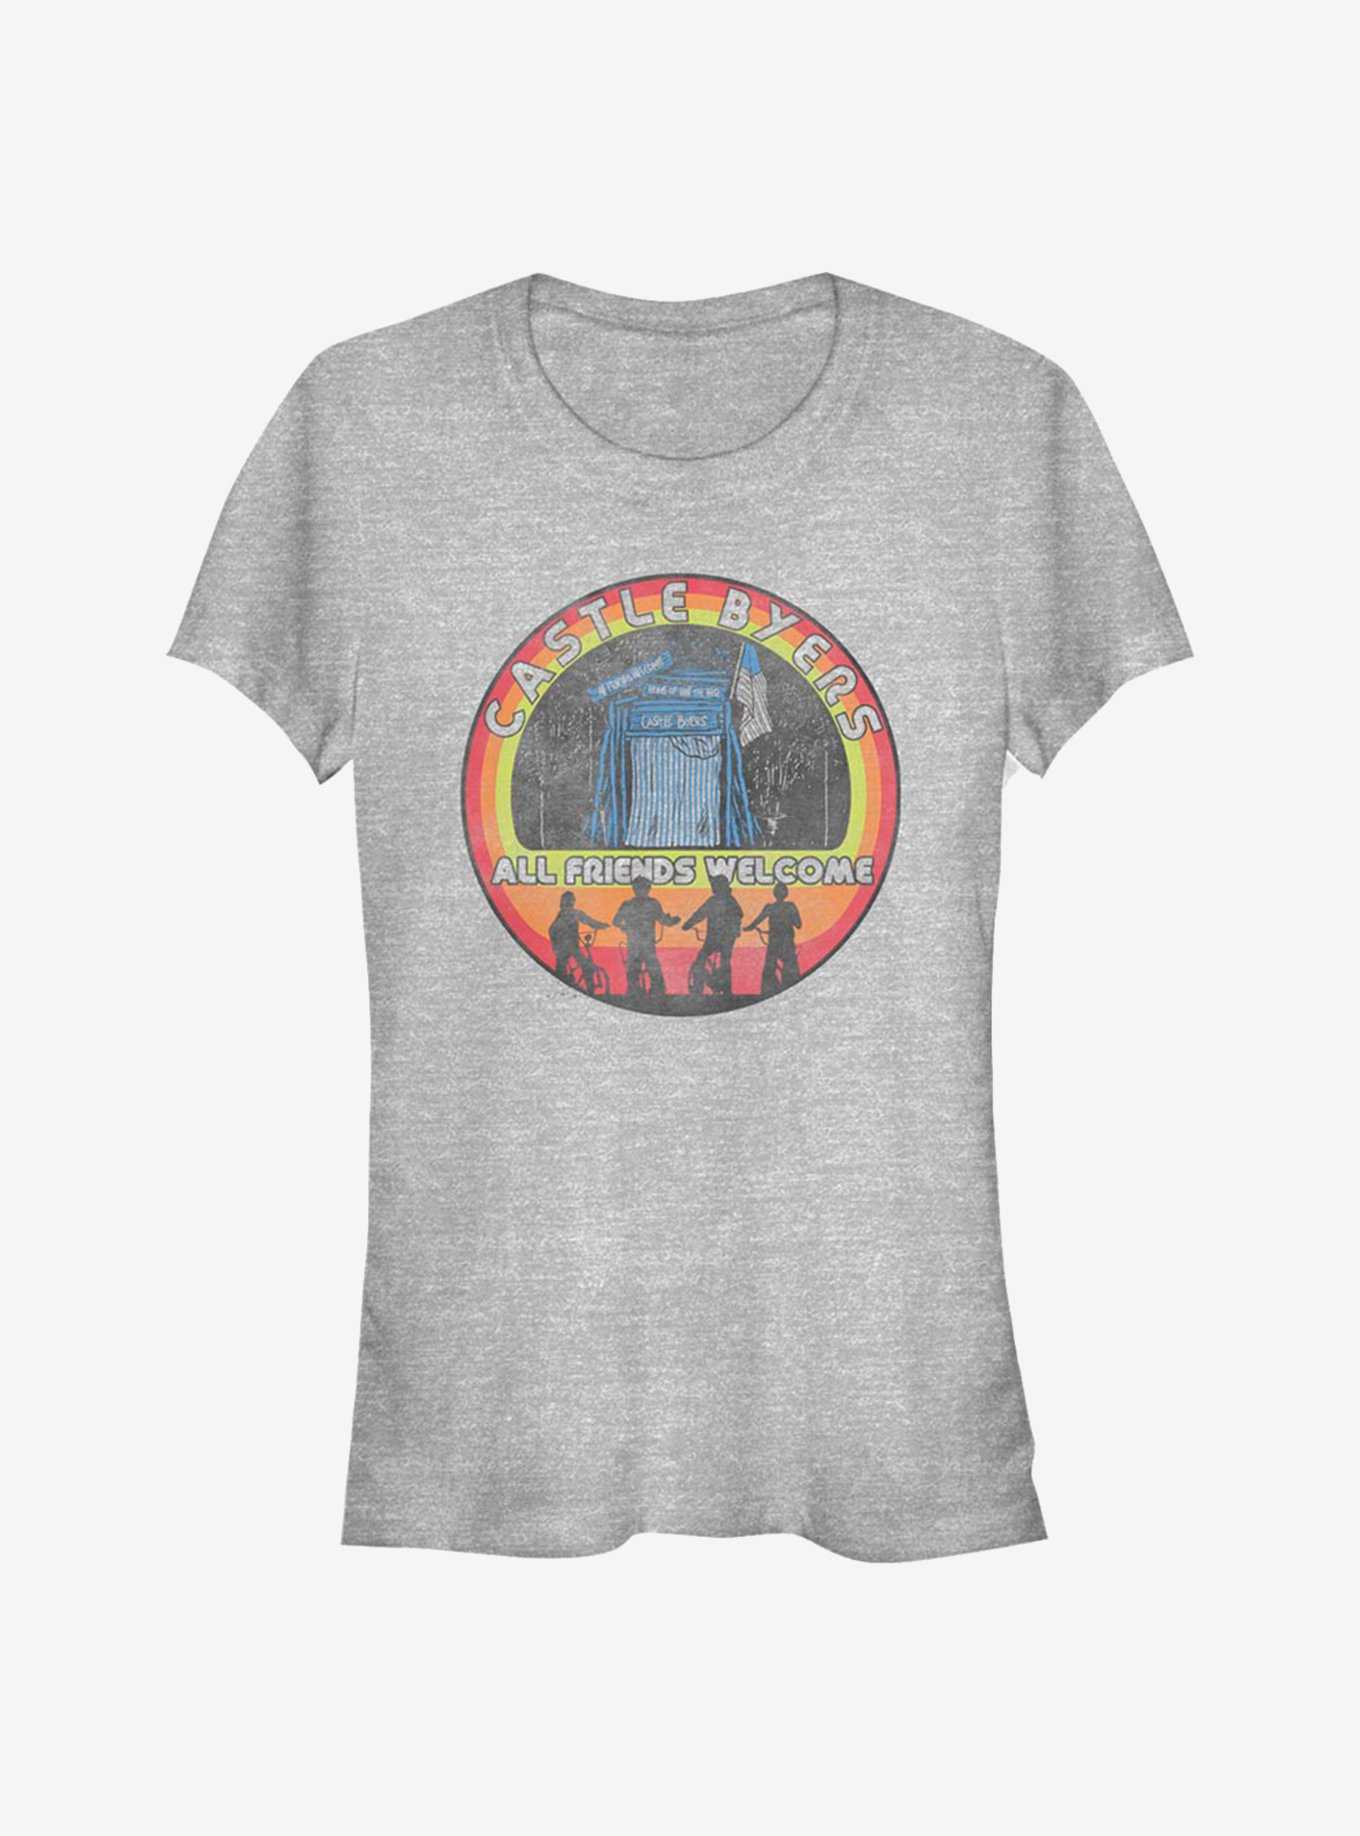 Stranger Things Castle Byers All Friends Welcome Girls T-Shirt, , hi-res